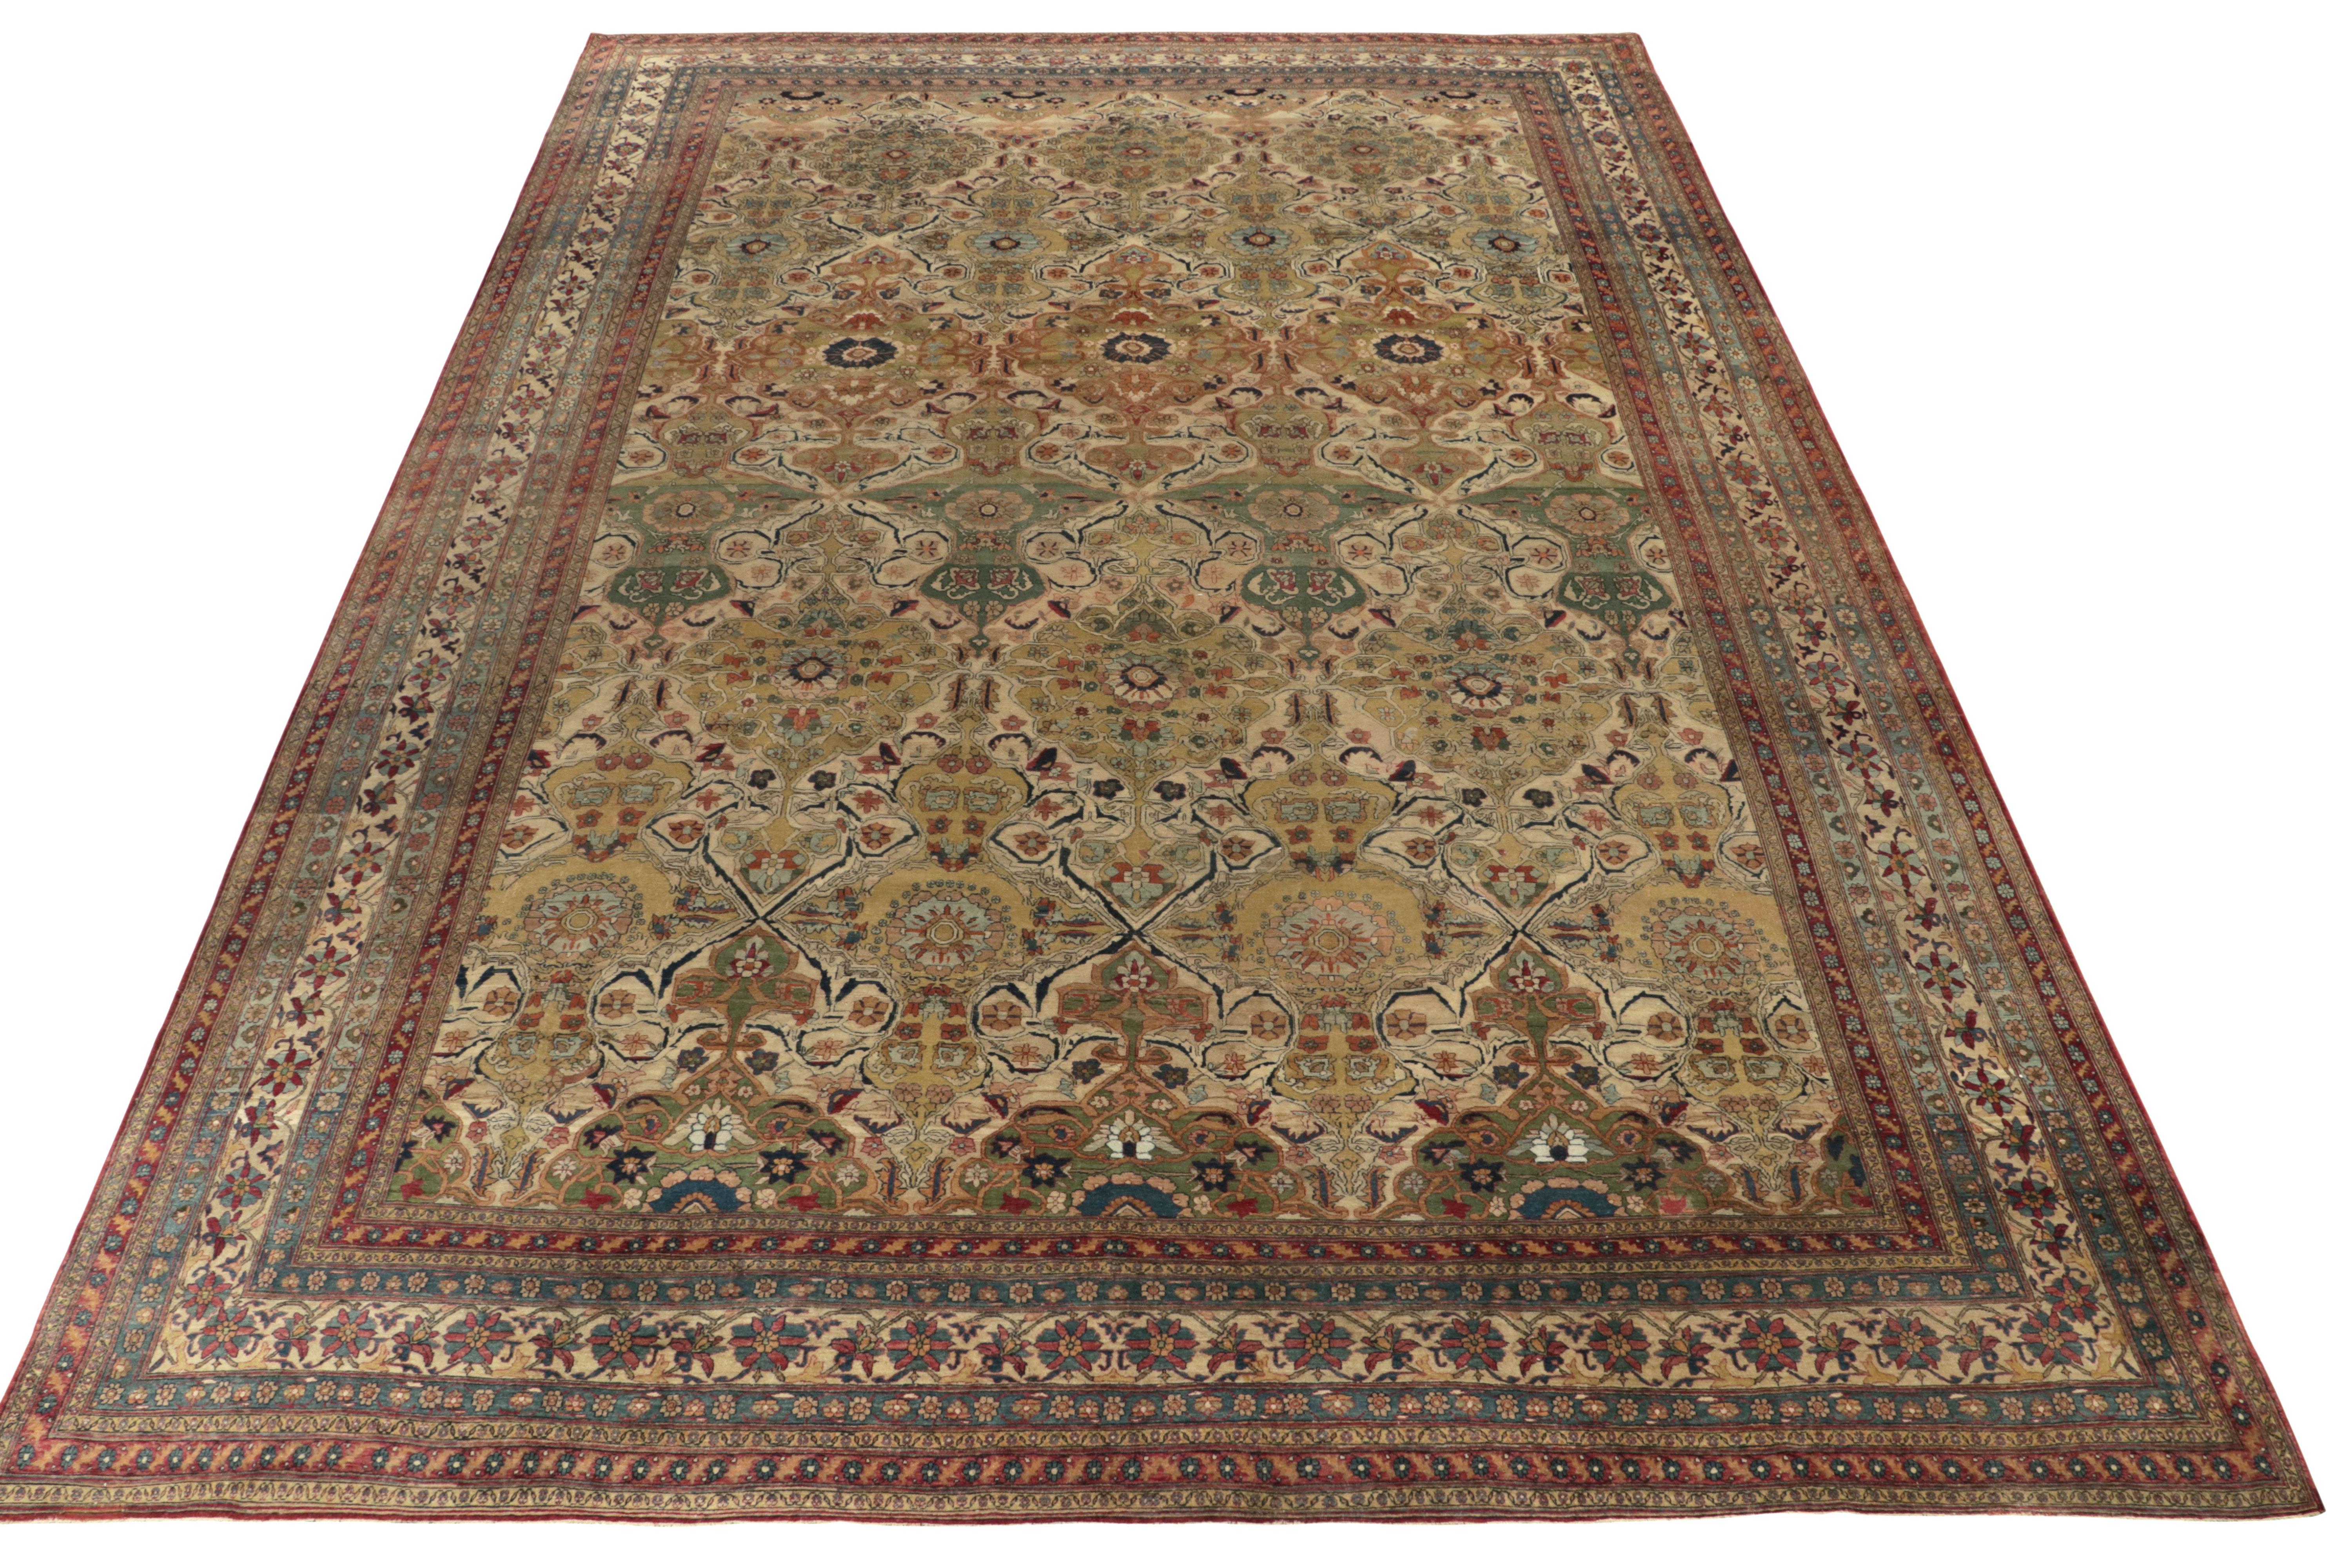 From Rug & Kilim’s coveted antique curations, a gracious 12x17 Kerman Lavar rug originating from Persia circa 1910-1920. 

This gorgeous traditional piece revels in a rare colorway accenting the prevalent beige-brown, green & tones of blue to